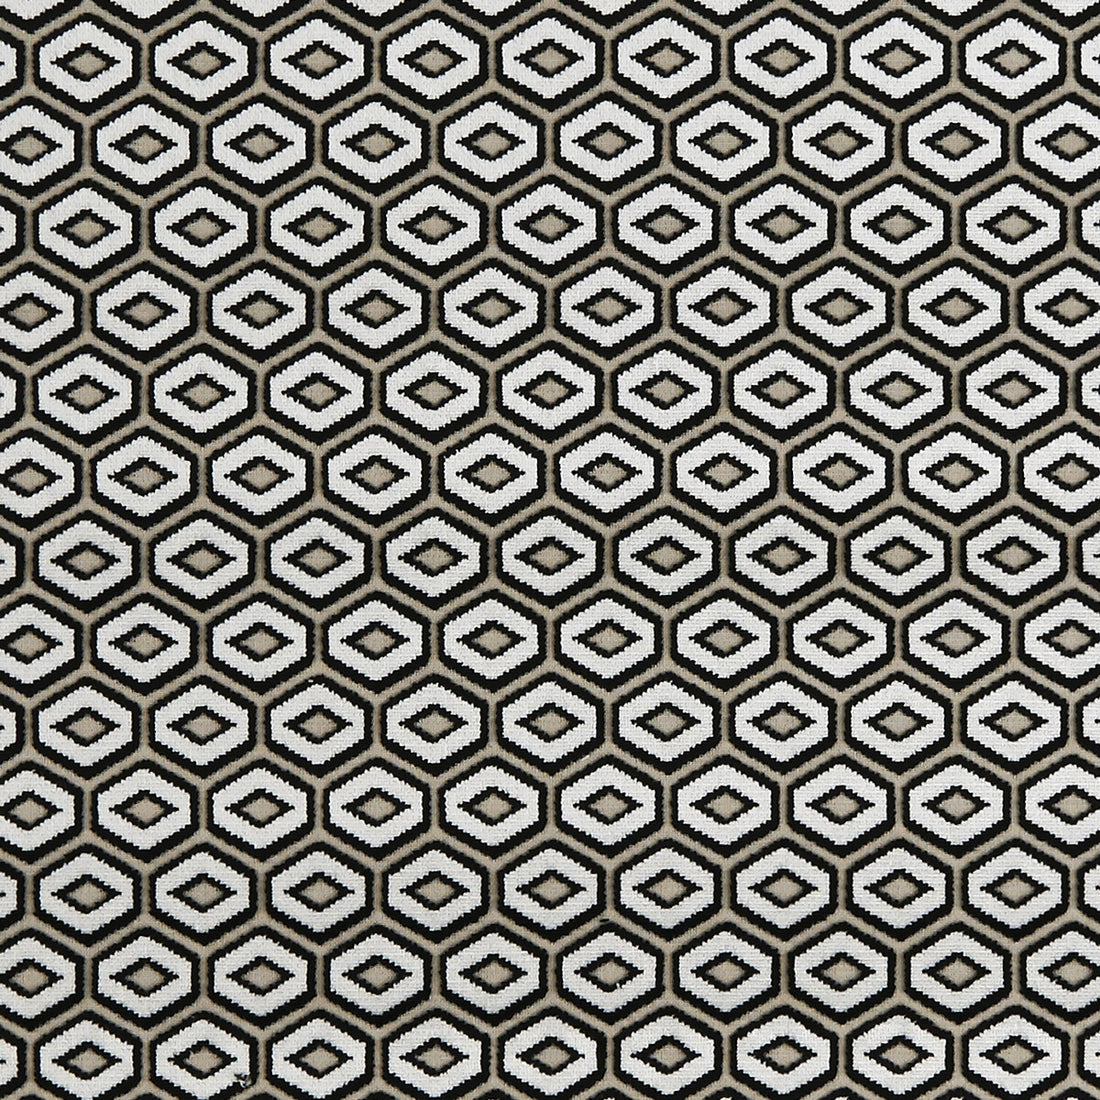 Bw1041 fabric in black/white color - pattern F0943/01.CAC.0 - by Clarke And Clarke in the Clarke &amp; Clarke Black + White collection